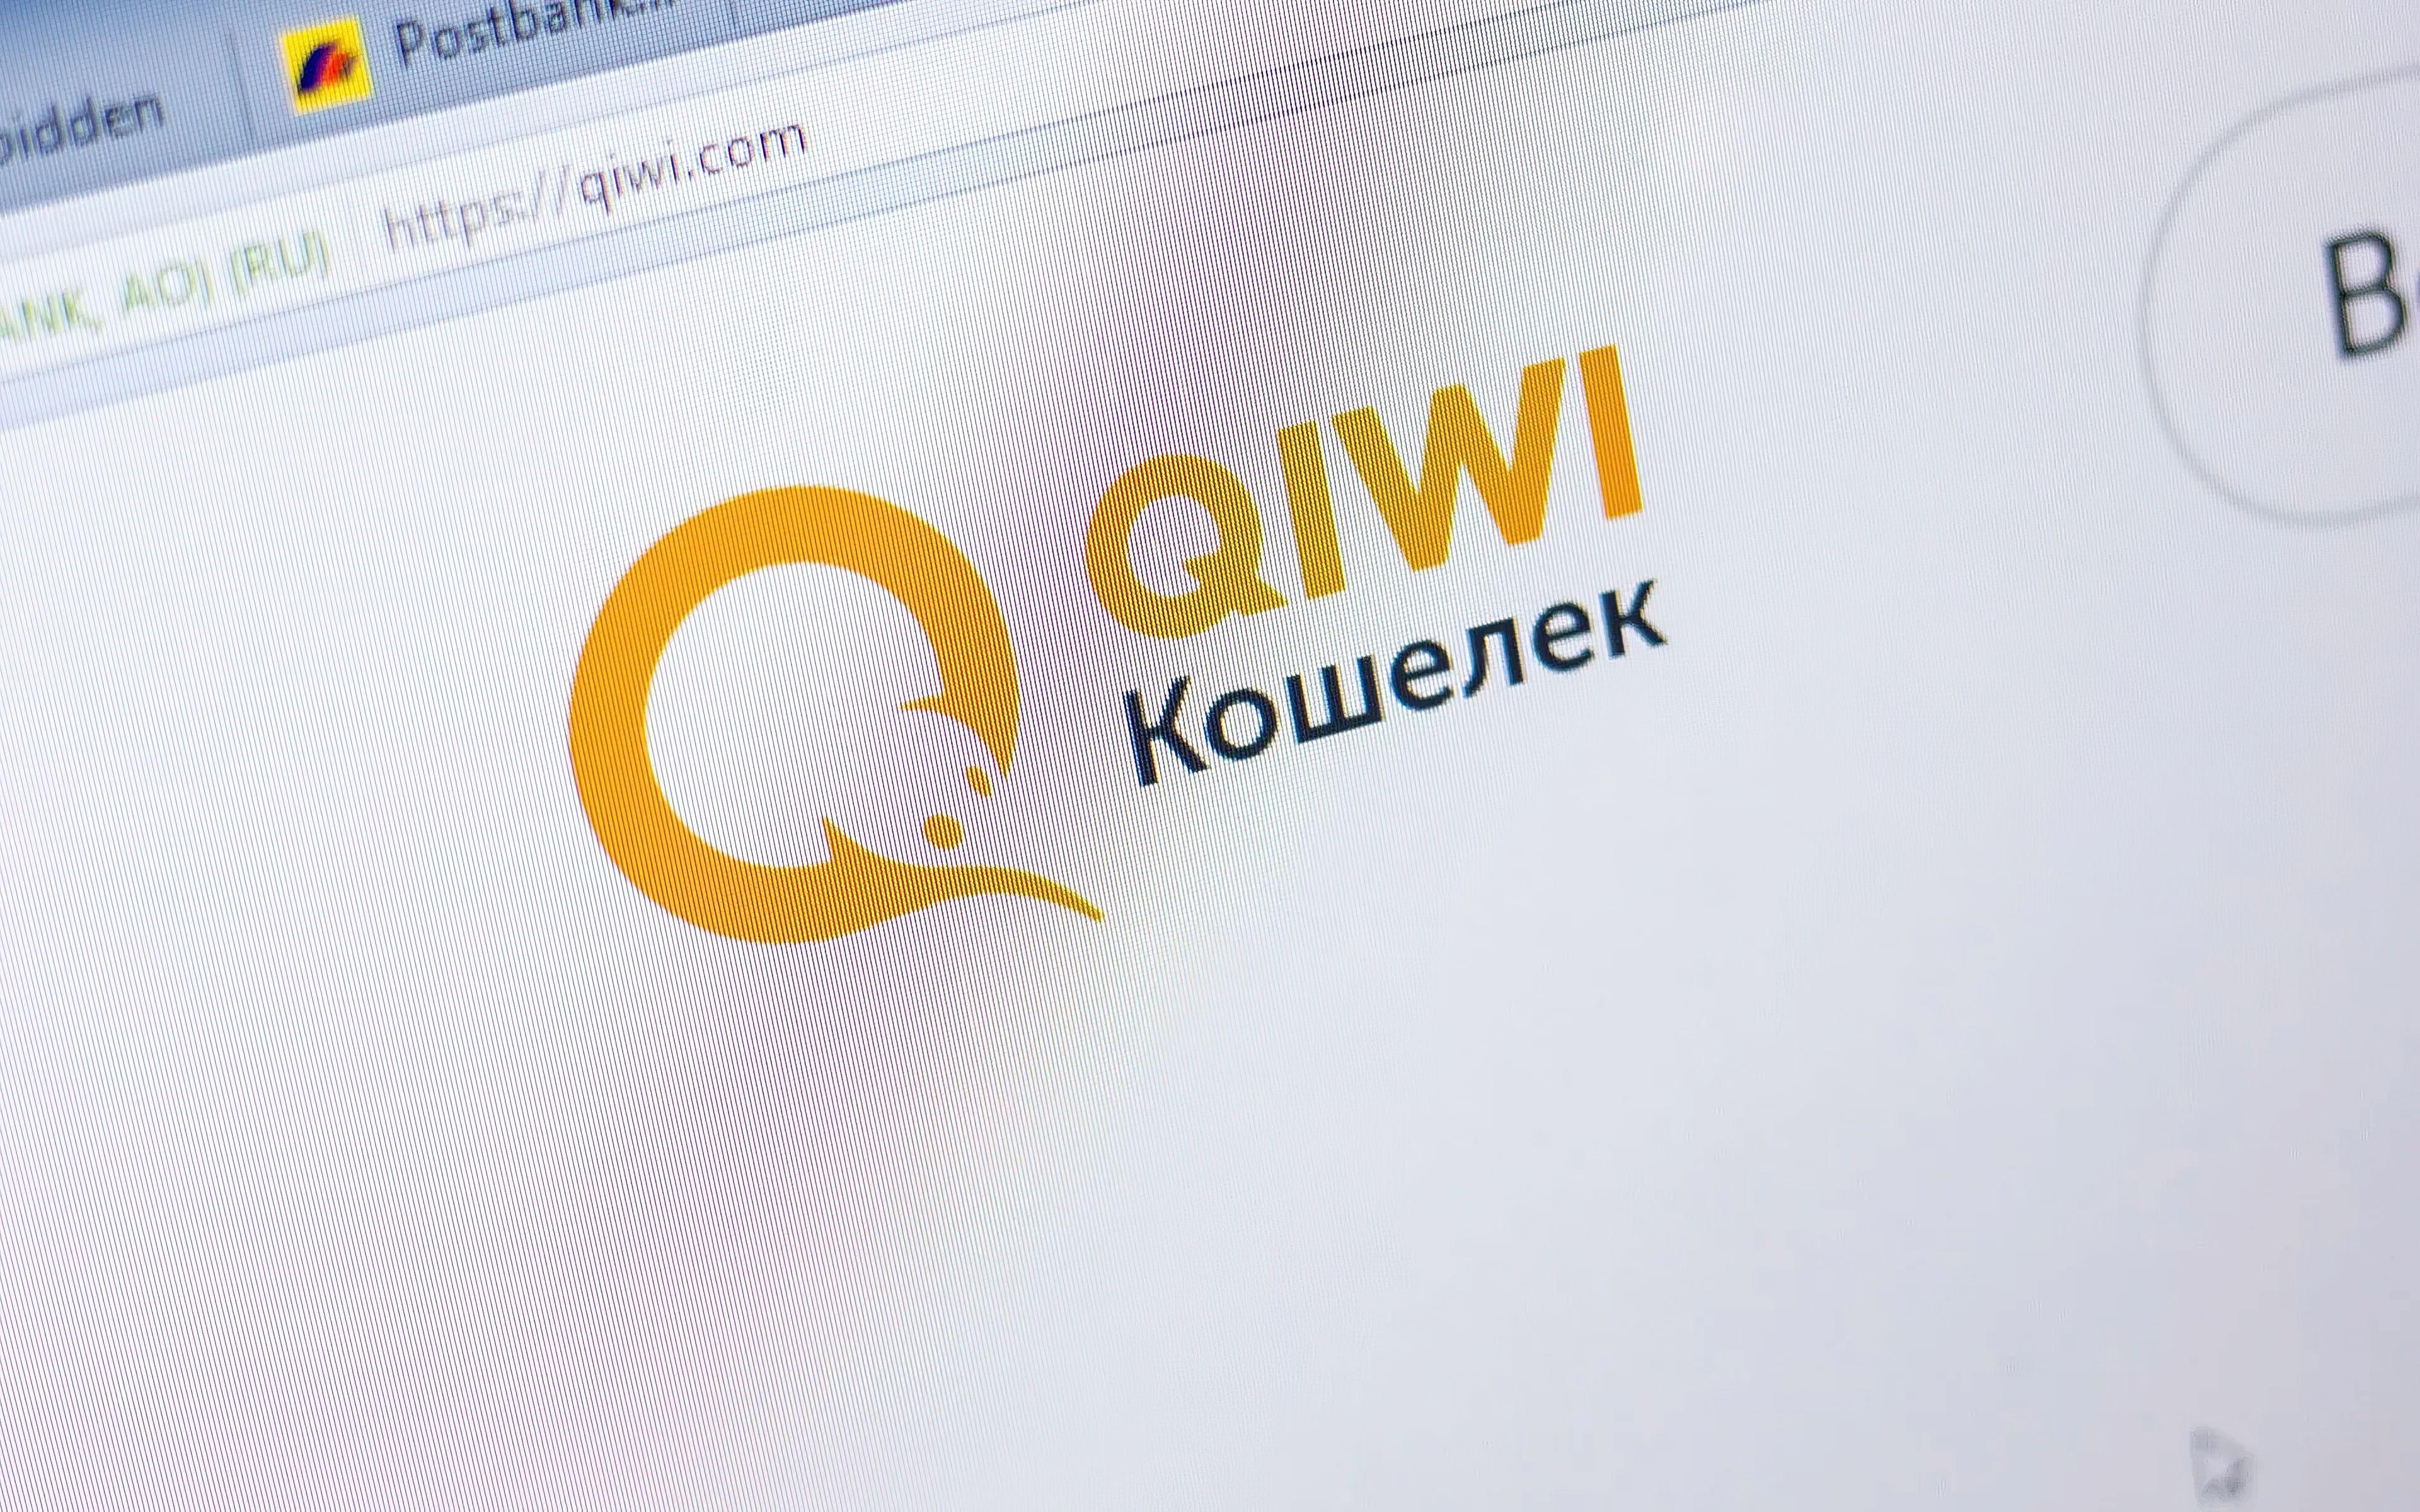 Qiwi restricted deposits and withdrawals from its wallets